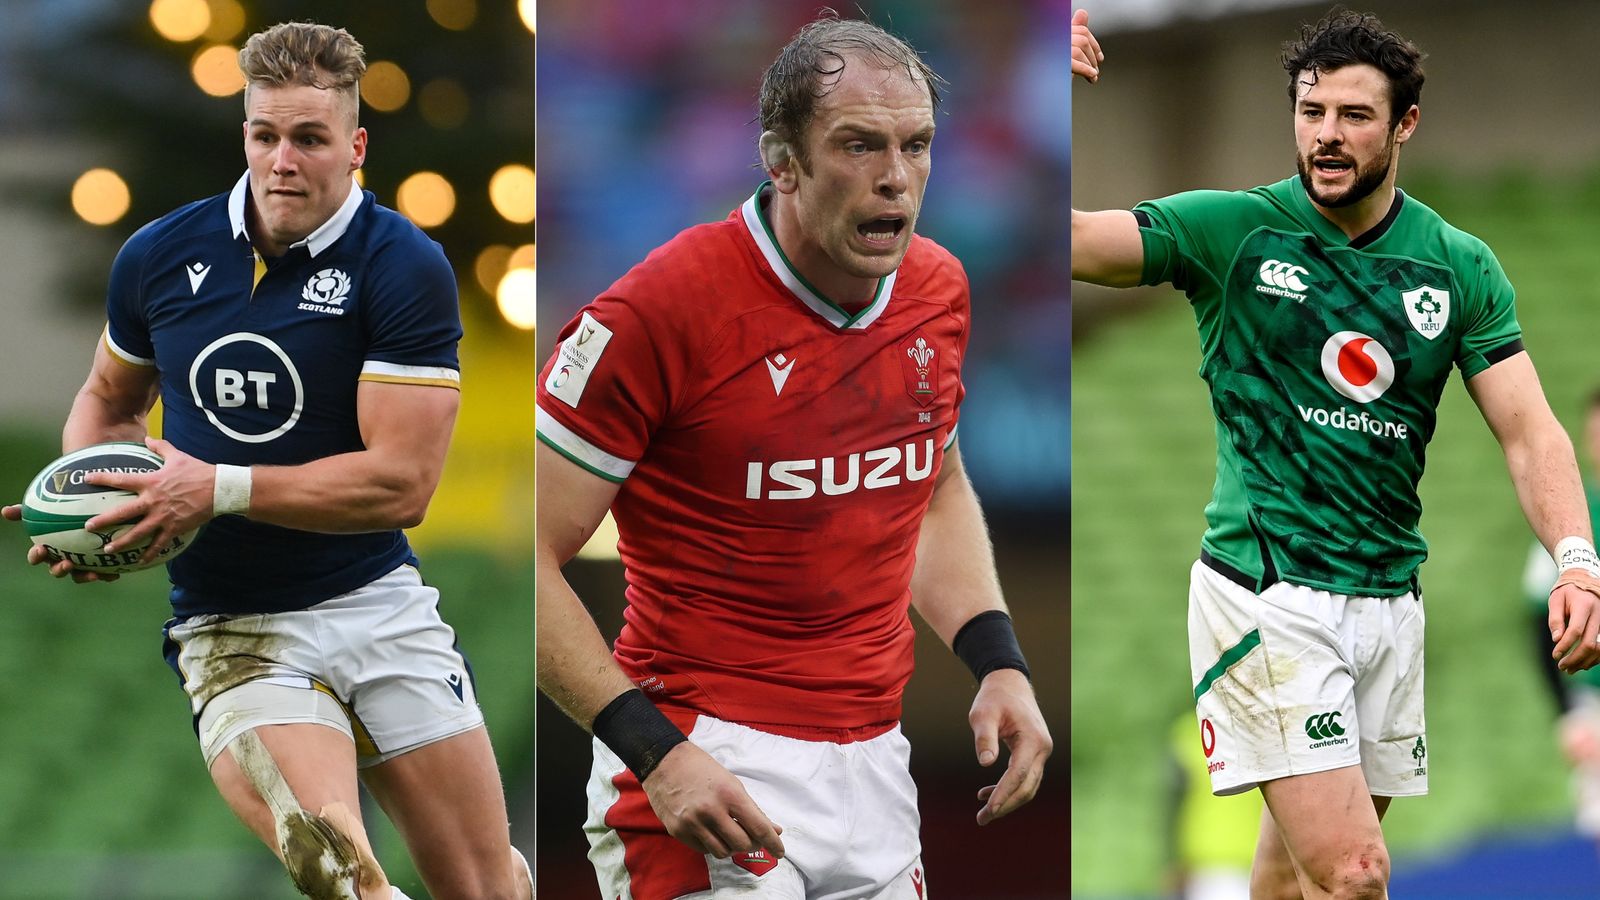 British and Irish Lions team candidate: Who impressed England, Wales, Ireland and Scotland in the fifth round of the Six Nations?  |  Rugby Union News